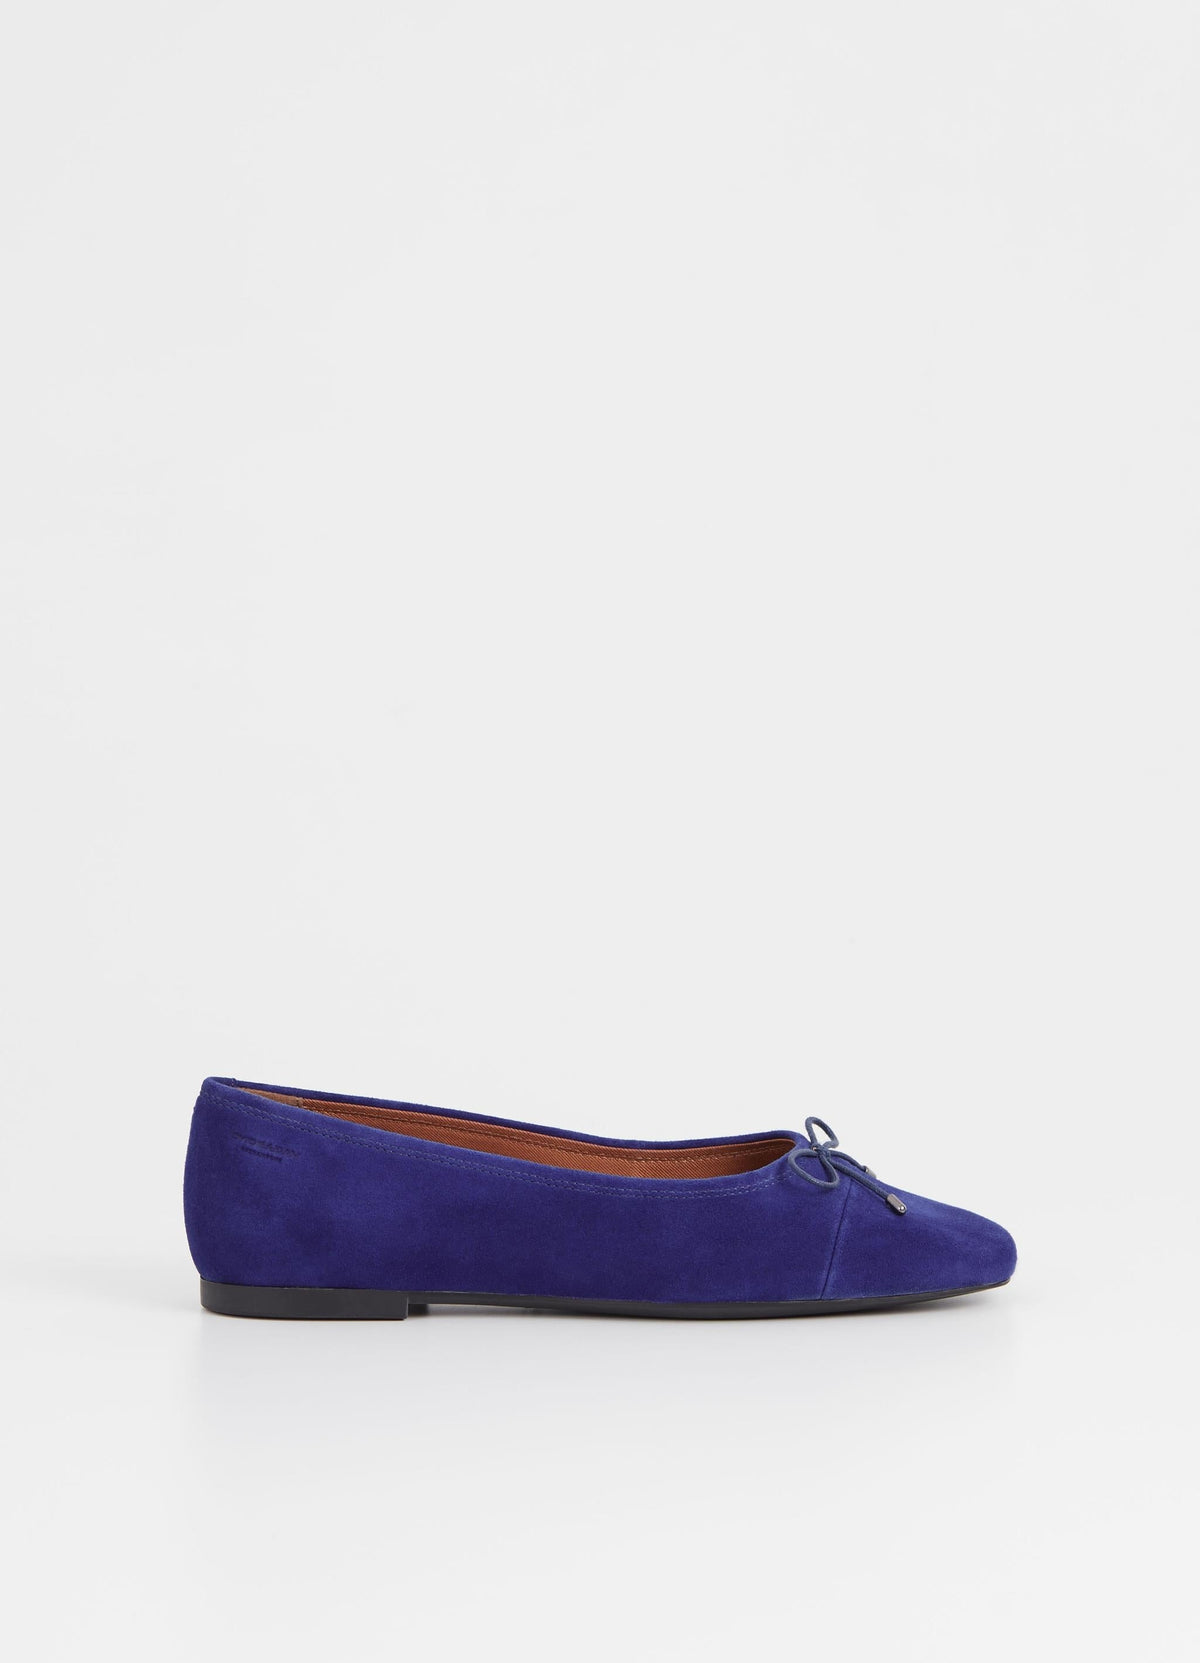 Cobalt blue suede ballet shoe with bow detail